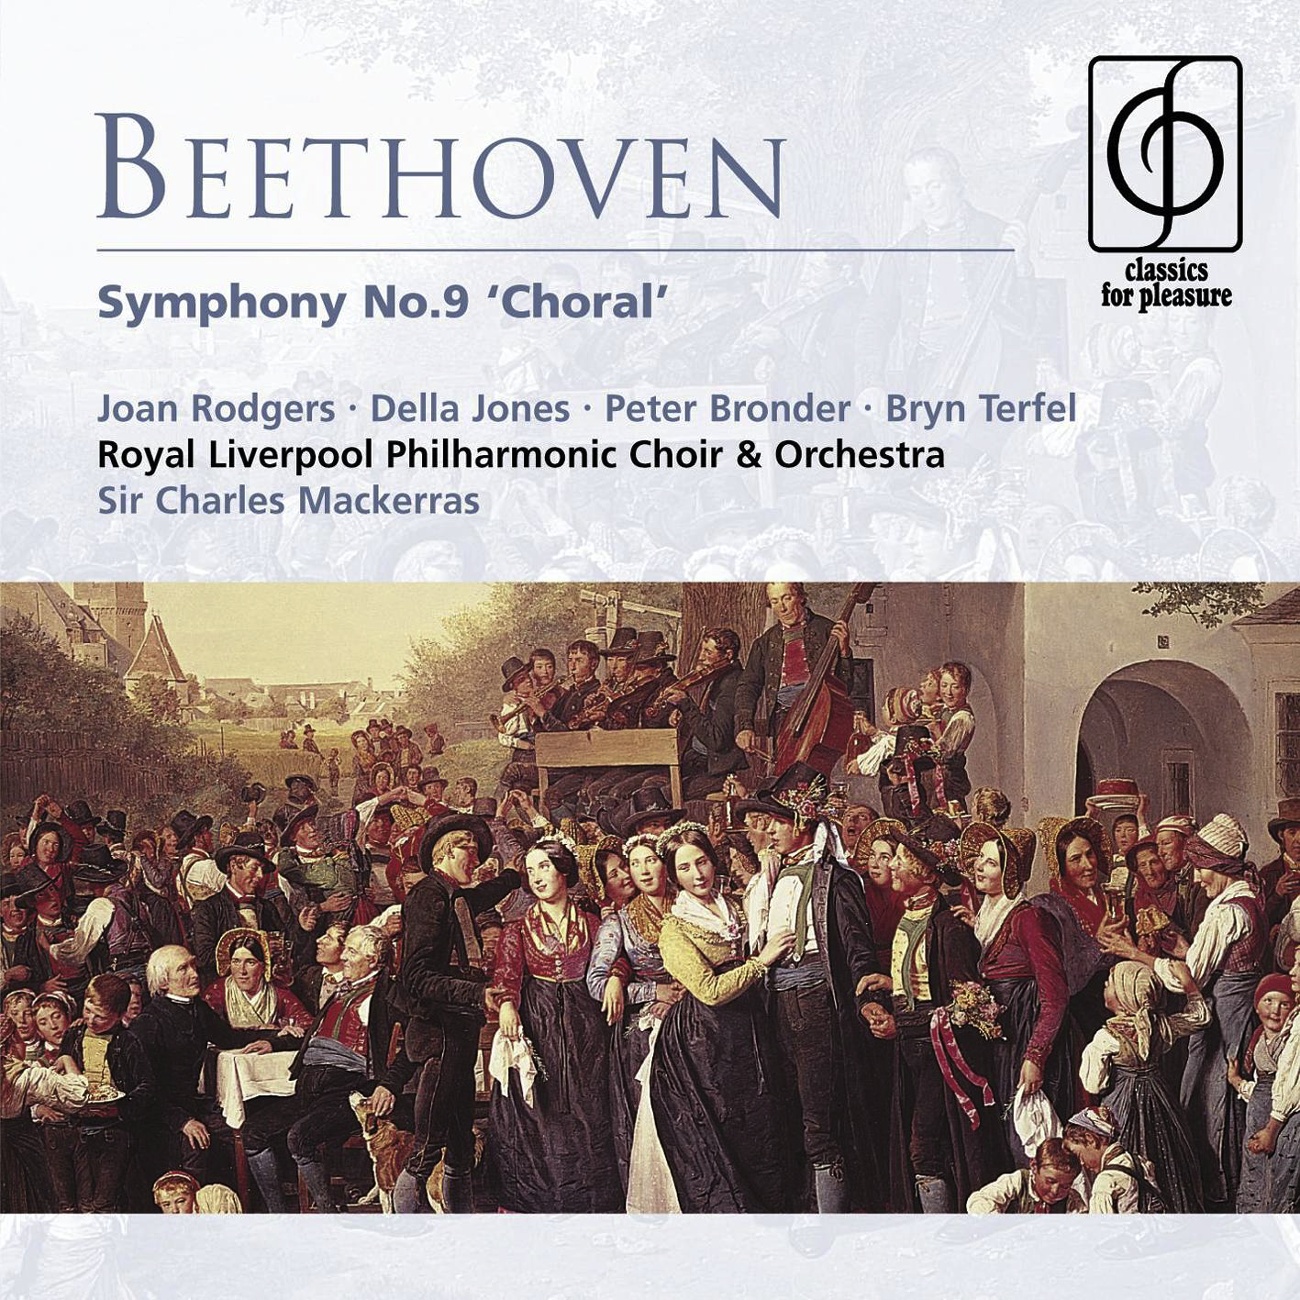 Symphony No. 9 in D minor 'Choral' Op. 125, IV.: Allegro ma non tanto -